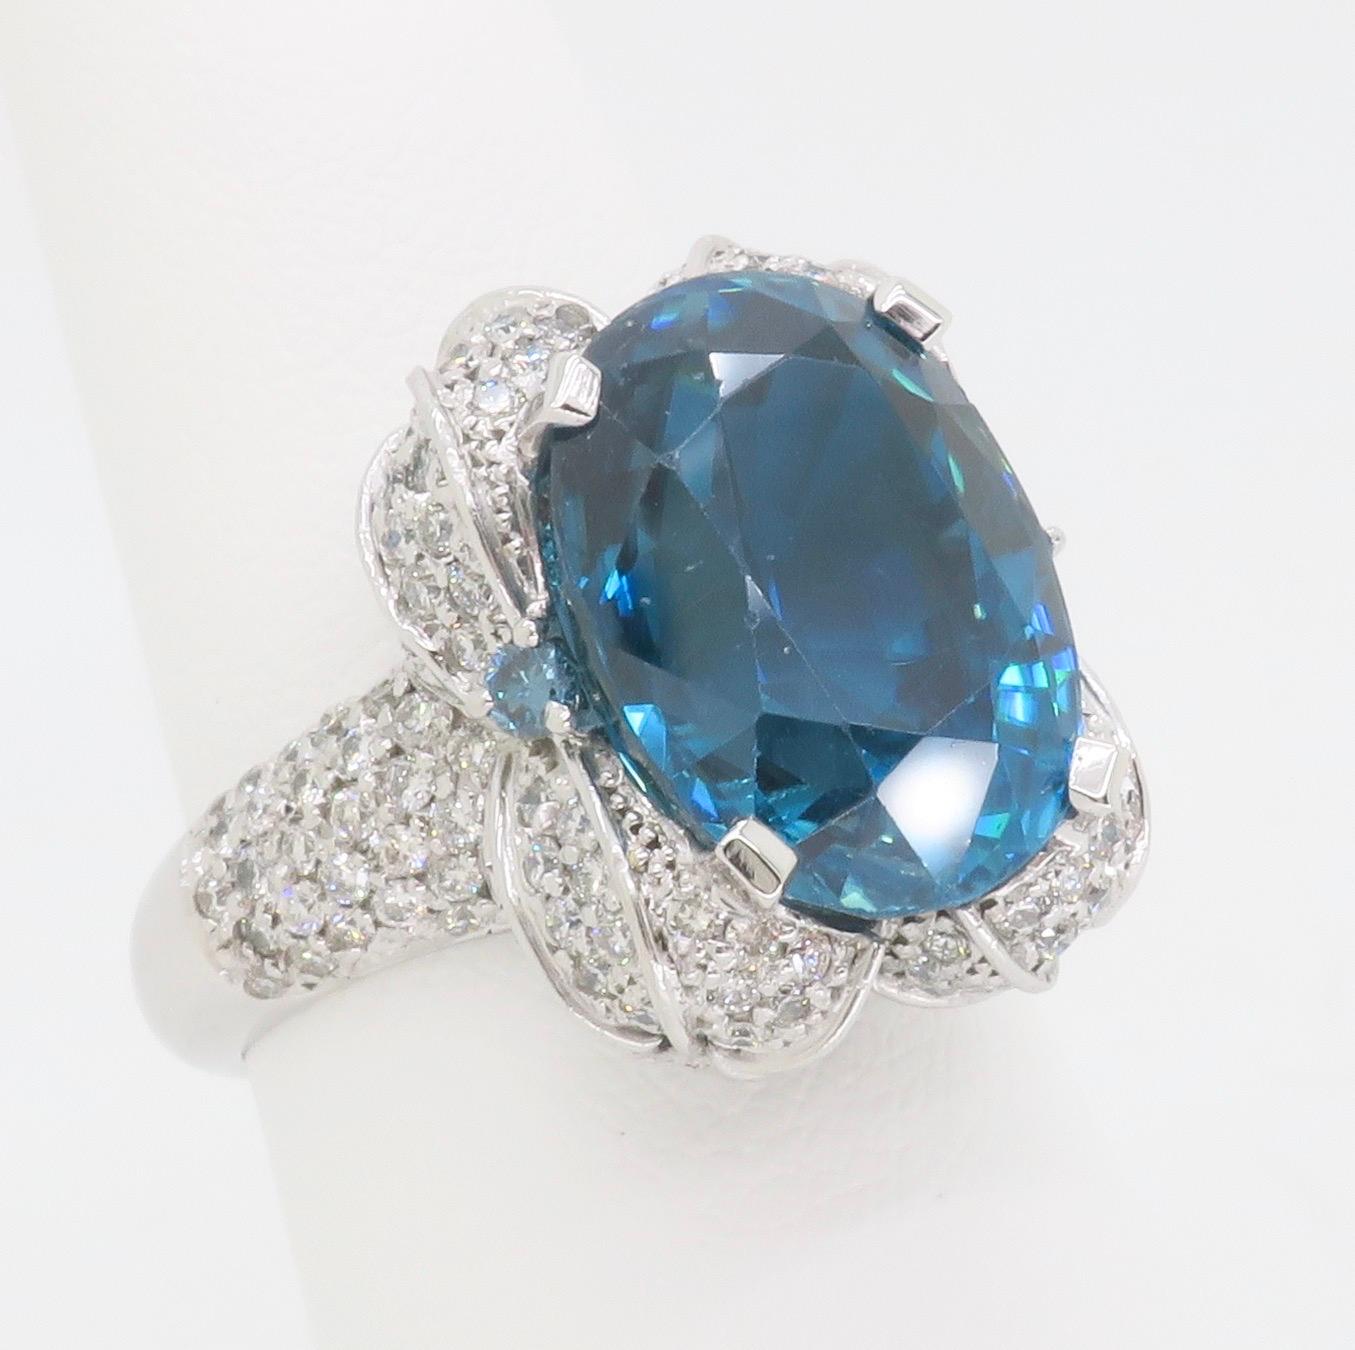 GIA Blue Zircon & Diamond Encrusted Ring in 18k White Gold  In Excellent Condition For Sale In Webster, NY